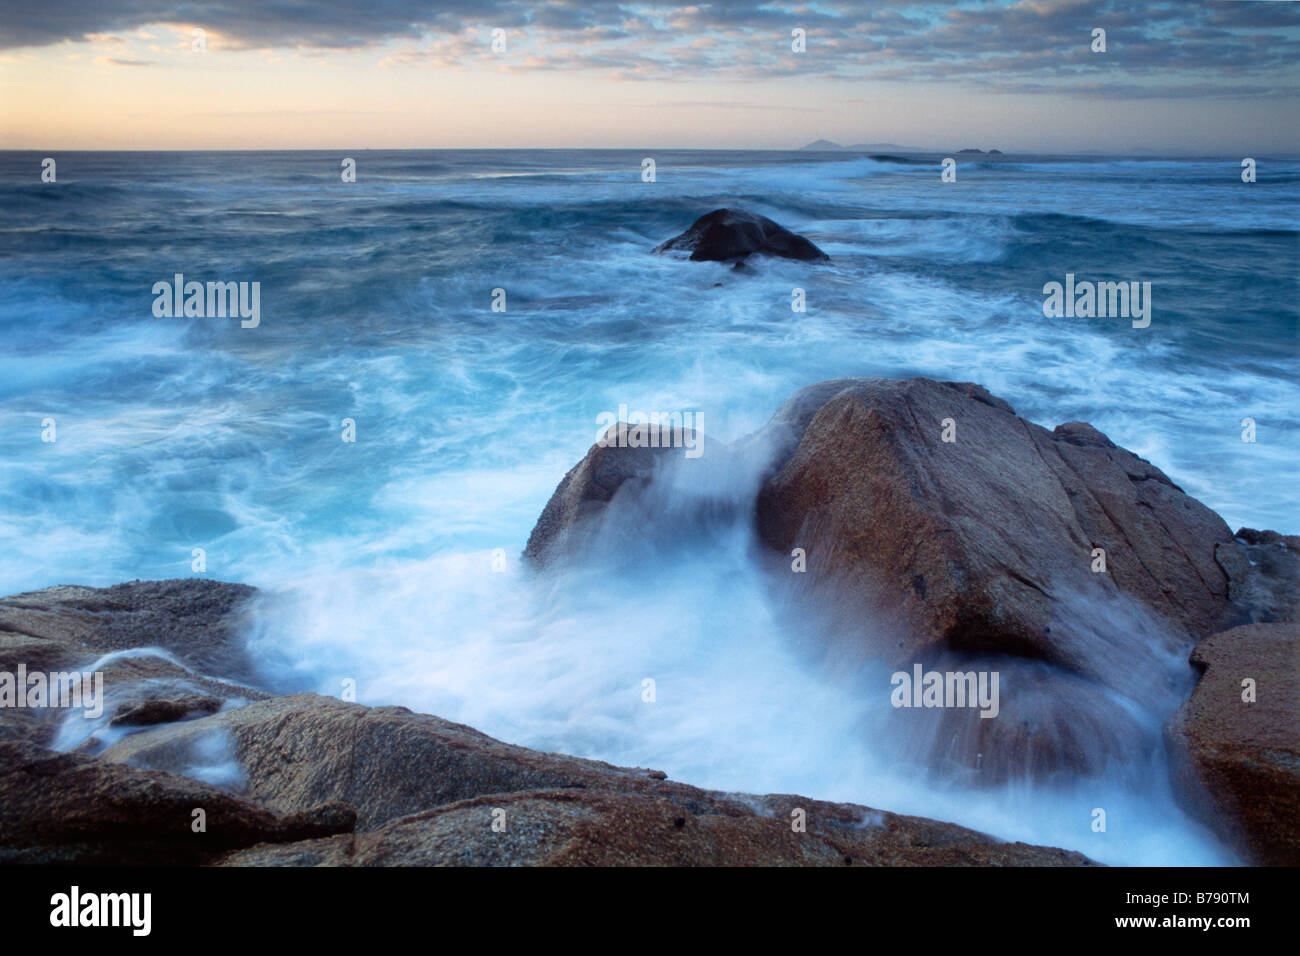 Onde e surf in testa Hat National Park, New South Wales, Australia Foto Stock